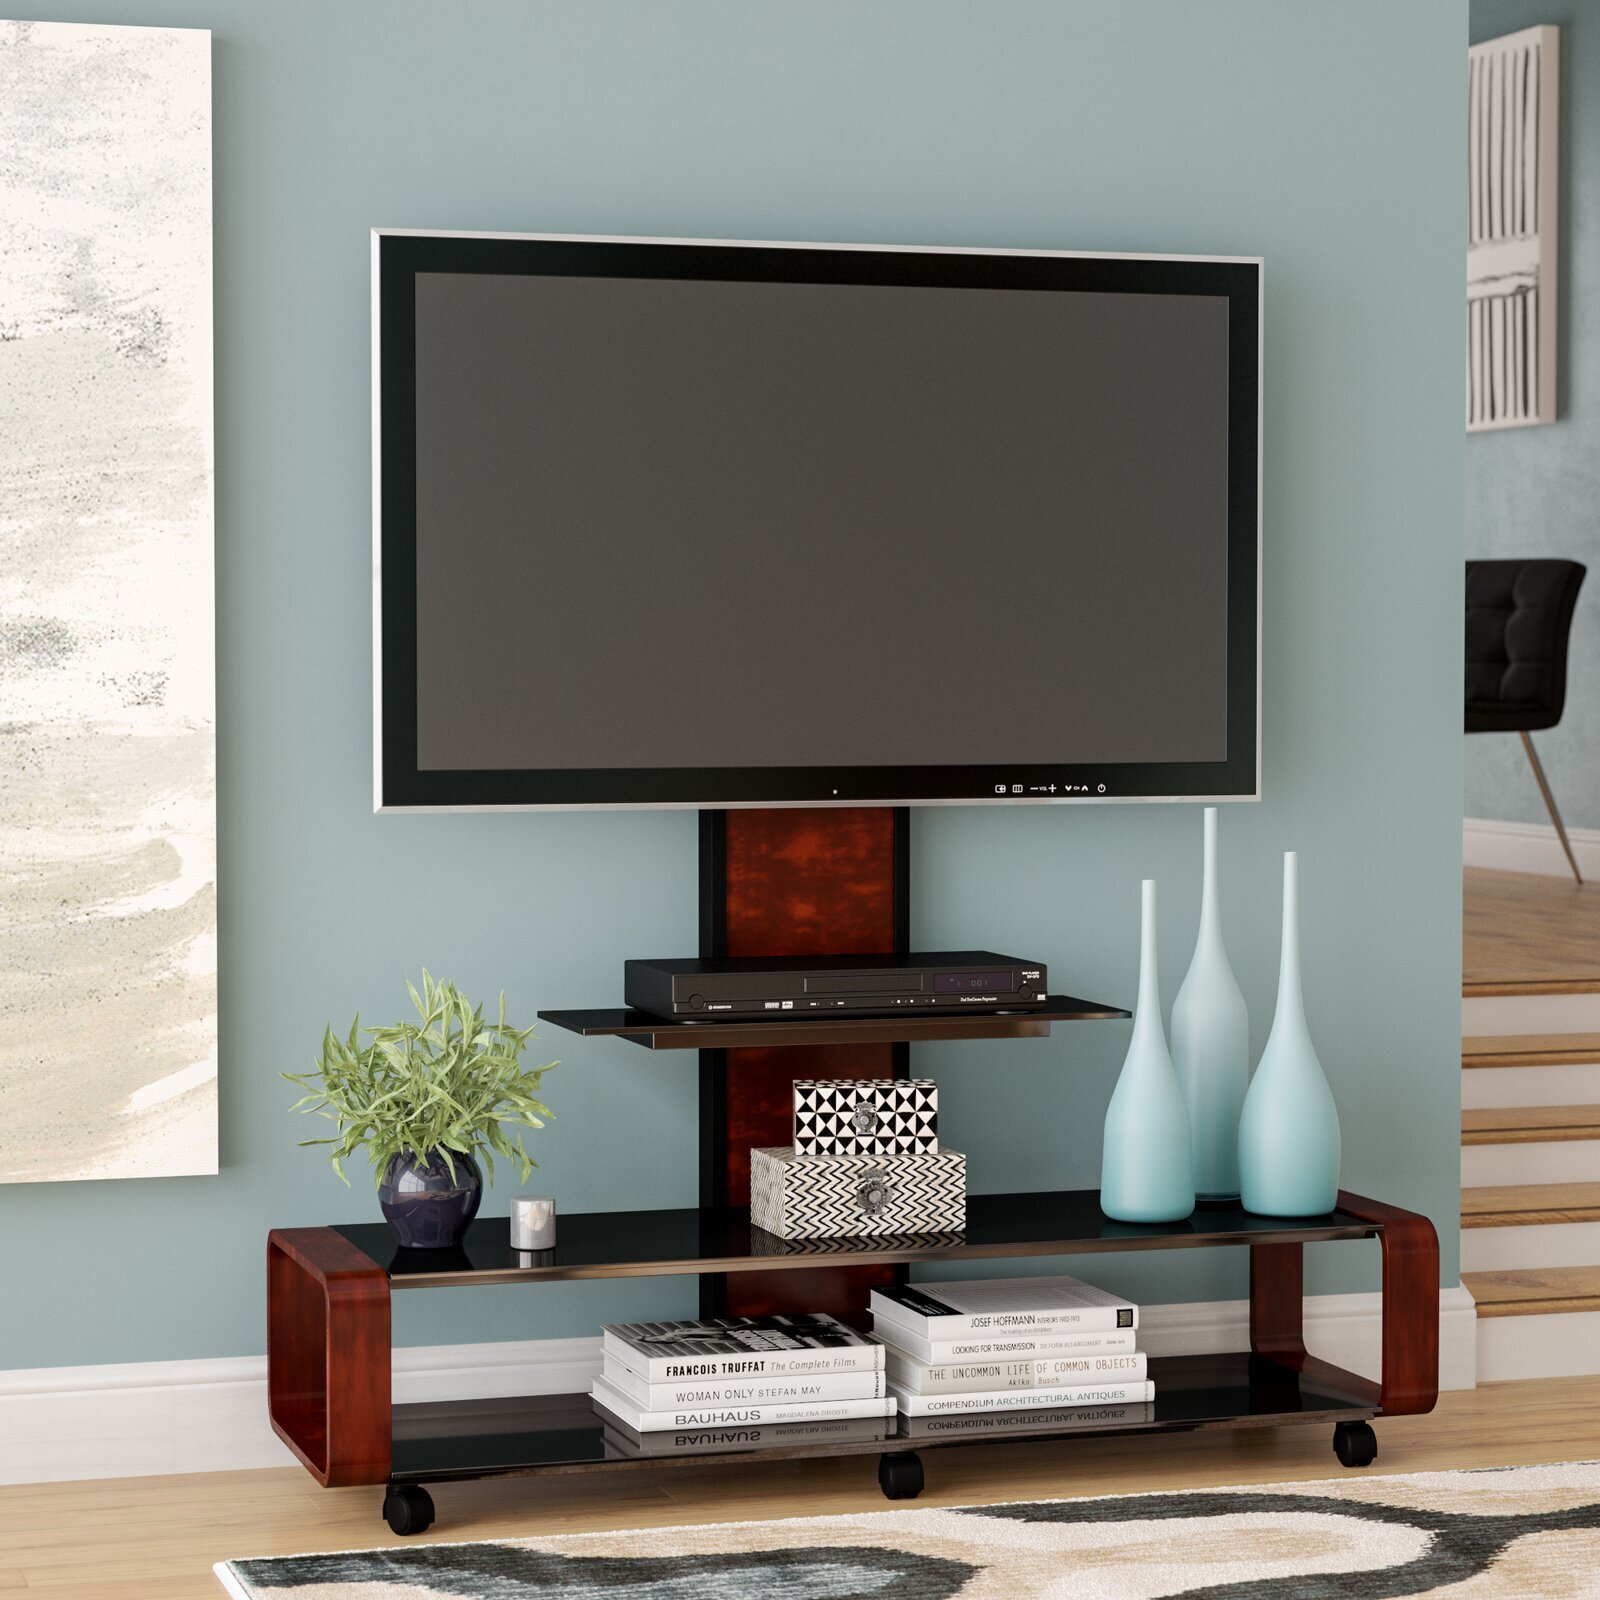 Swivel Mount TV Stand For Large Flat Screens